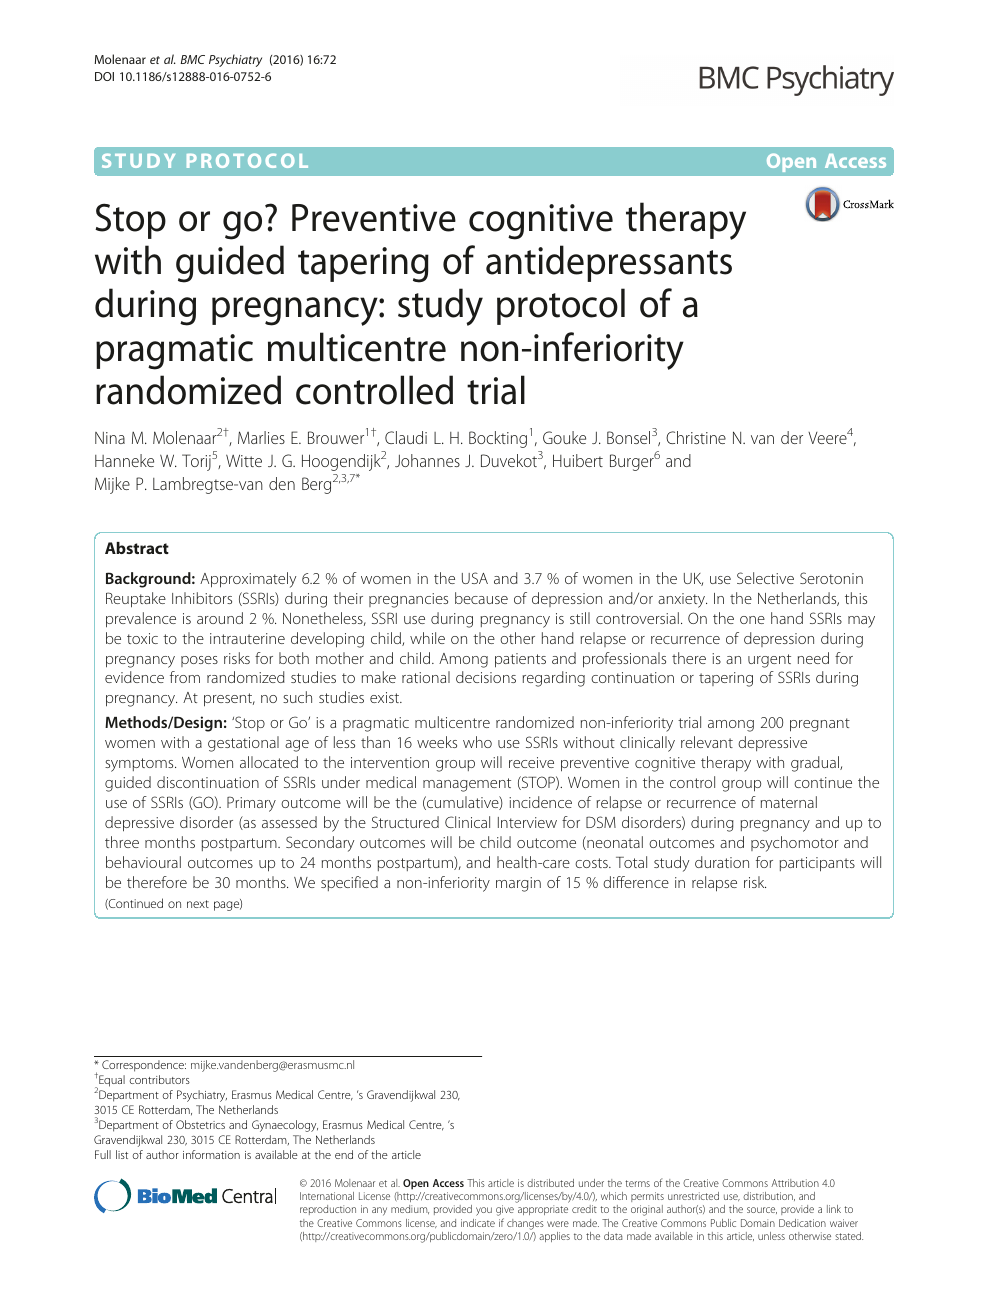 Stop Or Go Preventive Cognitive Therapy With Guided Tapering Of Antidepressants During Pregnancy Study Protocol Of A Pragmatic Multicentre Non Inferiority Randomized Controlled Trial Topic Of Research Paper In Clinical Medicine Download